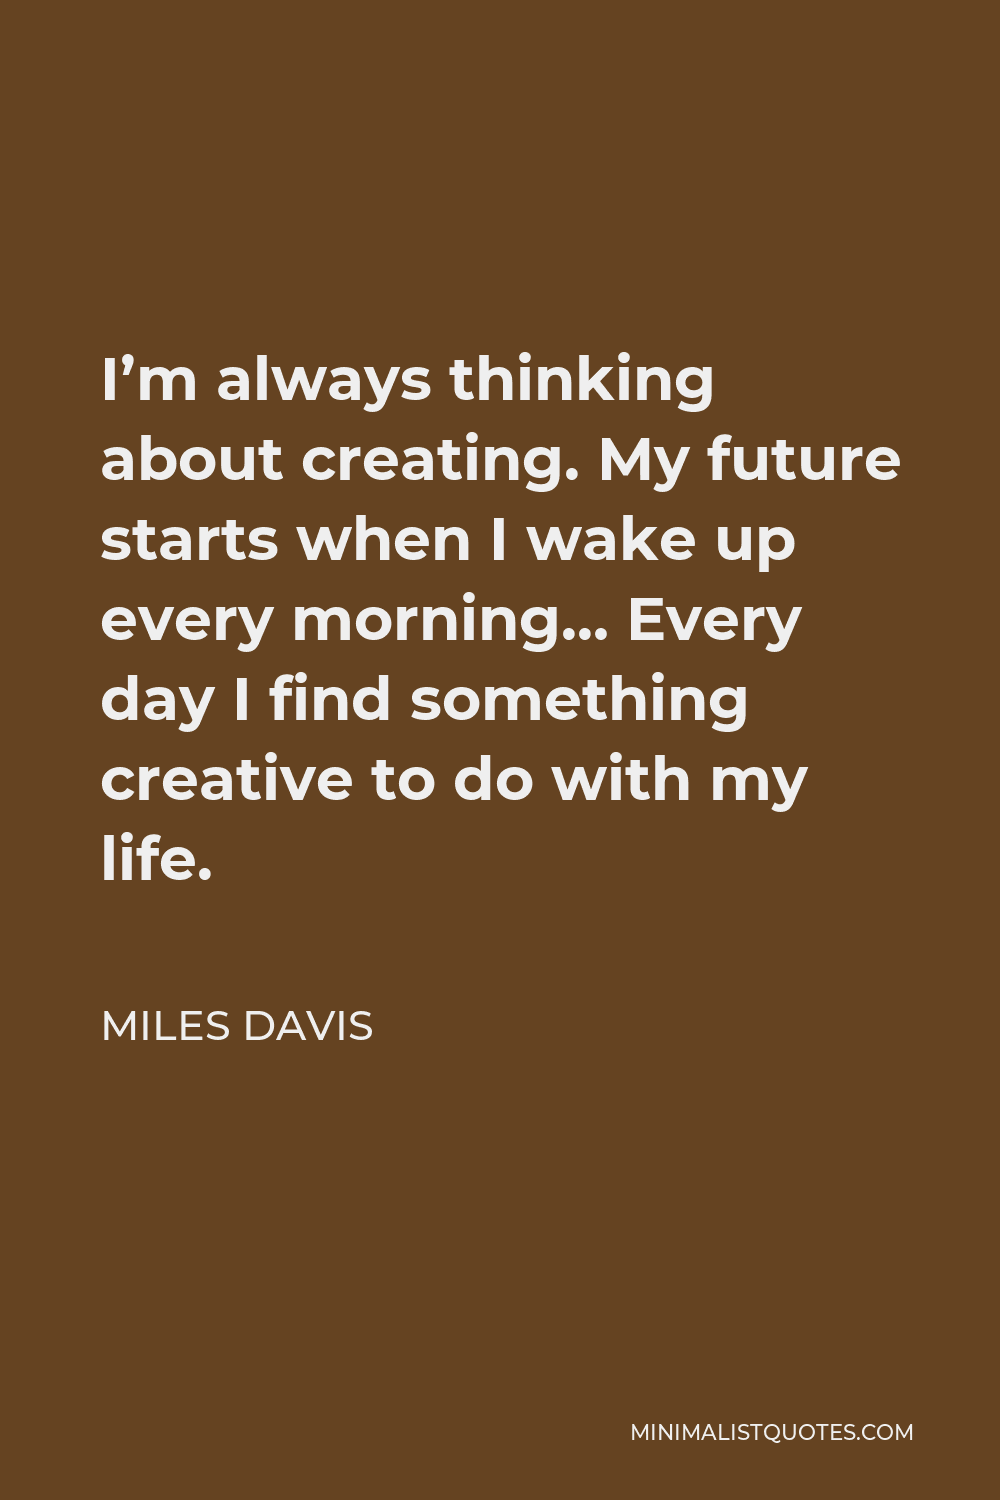 Miles Davis Quote - I’m always thinking about creating. My future starts when I wake up every morning… Every day I find something creative to do with my life.